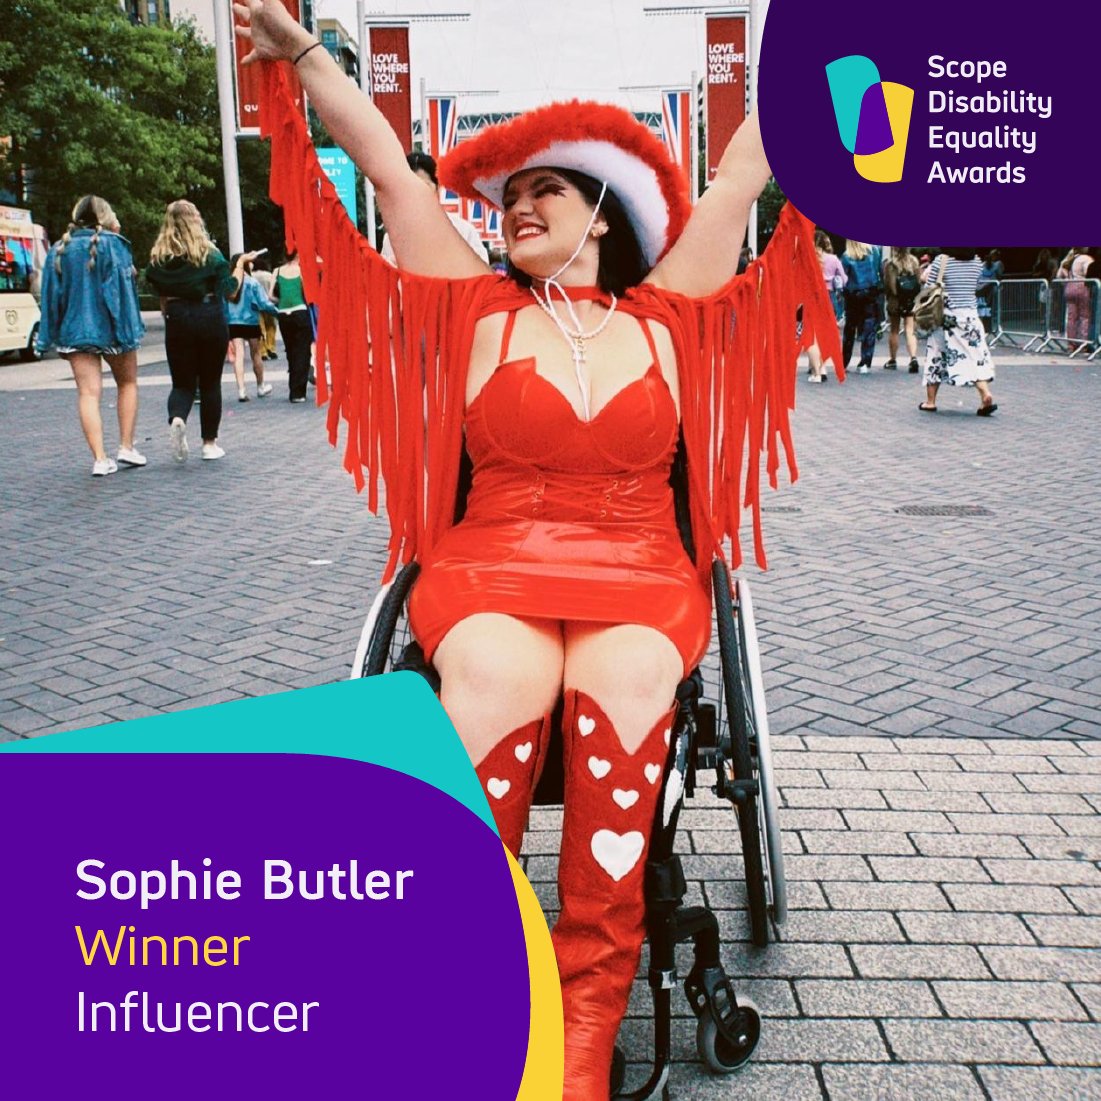 🏆 Sophie Butler takes home our Influencer award, voted for by the public 👏 @SophJButler’s content challenges stereotypes around beauty standards, sexuality, and fitness. Her brilliant ‘Sunday School’ pieces educate and empower people on disability-related issues 💜